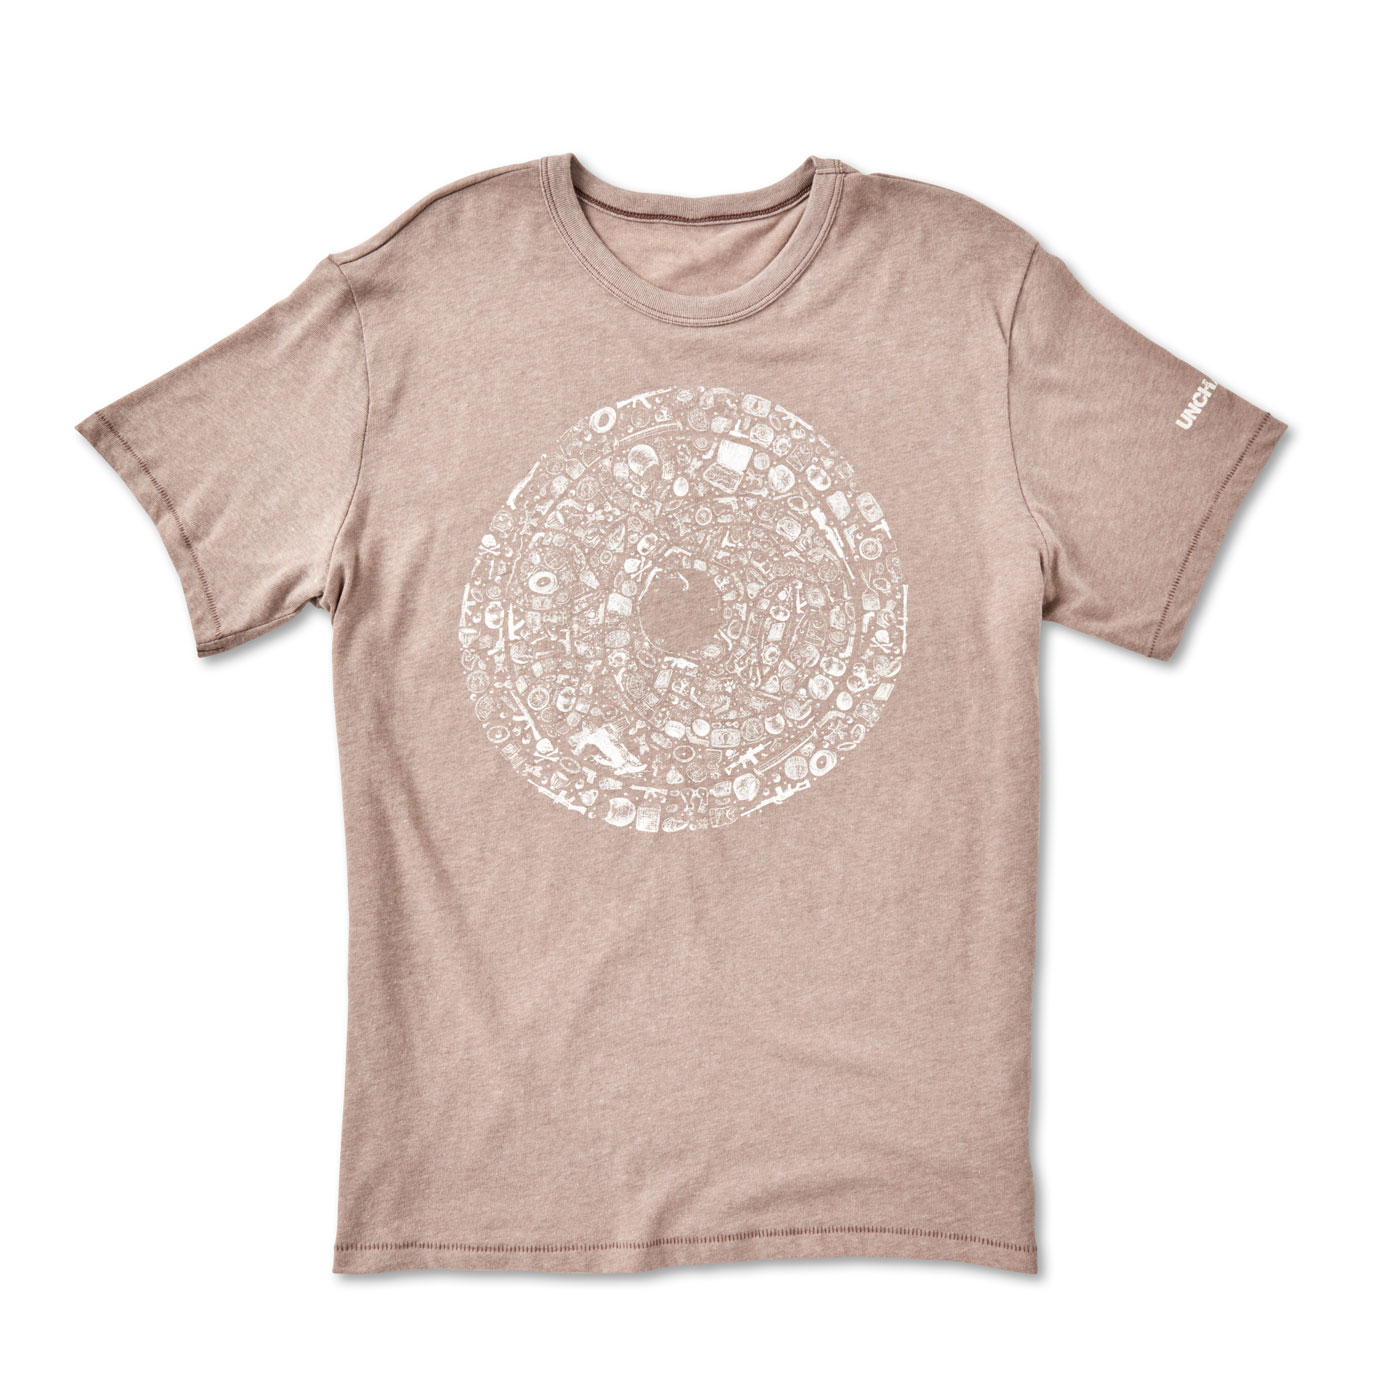 Uncharted 3 Cipher Disk Tee | PlayStation Gear